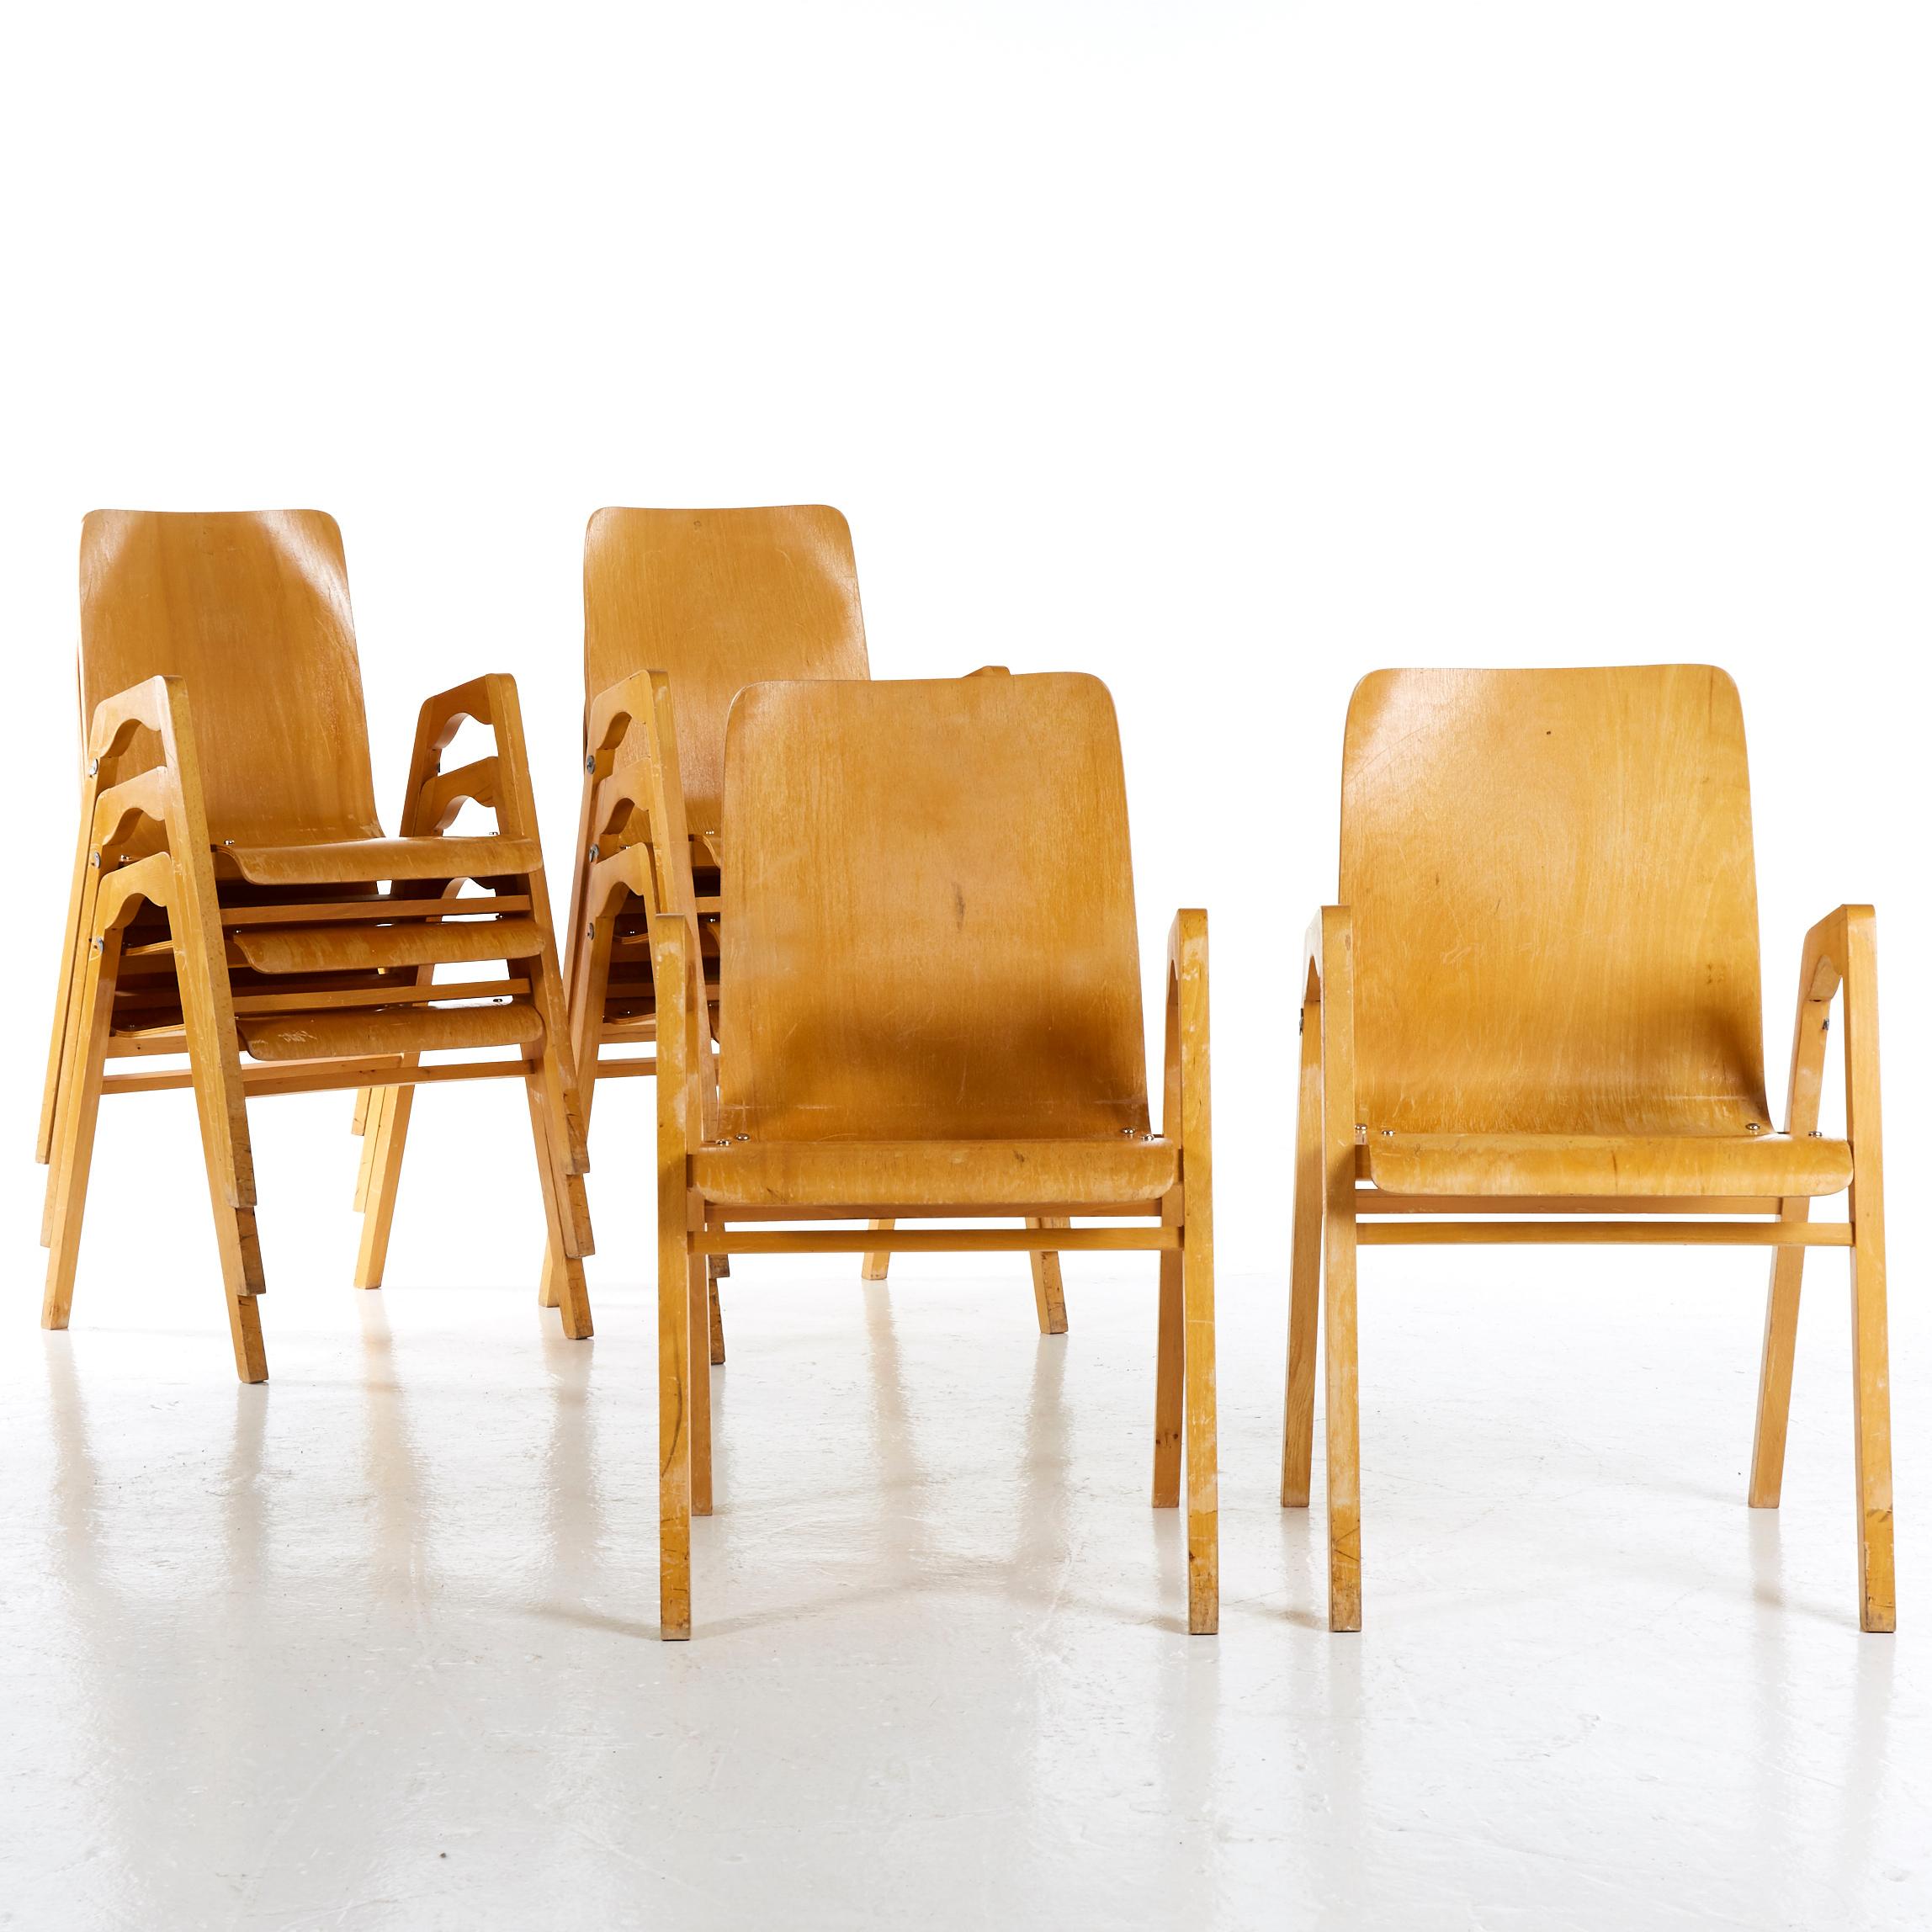 Axel Larsson for Svängsta Stilmöbler, the second half of the 20th century, set of eight armchairs, frame in solid birch, seat and back in layer-molded birch veneer, stackable.
 